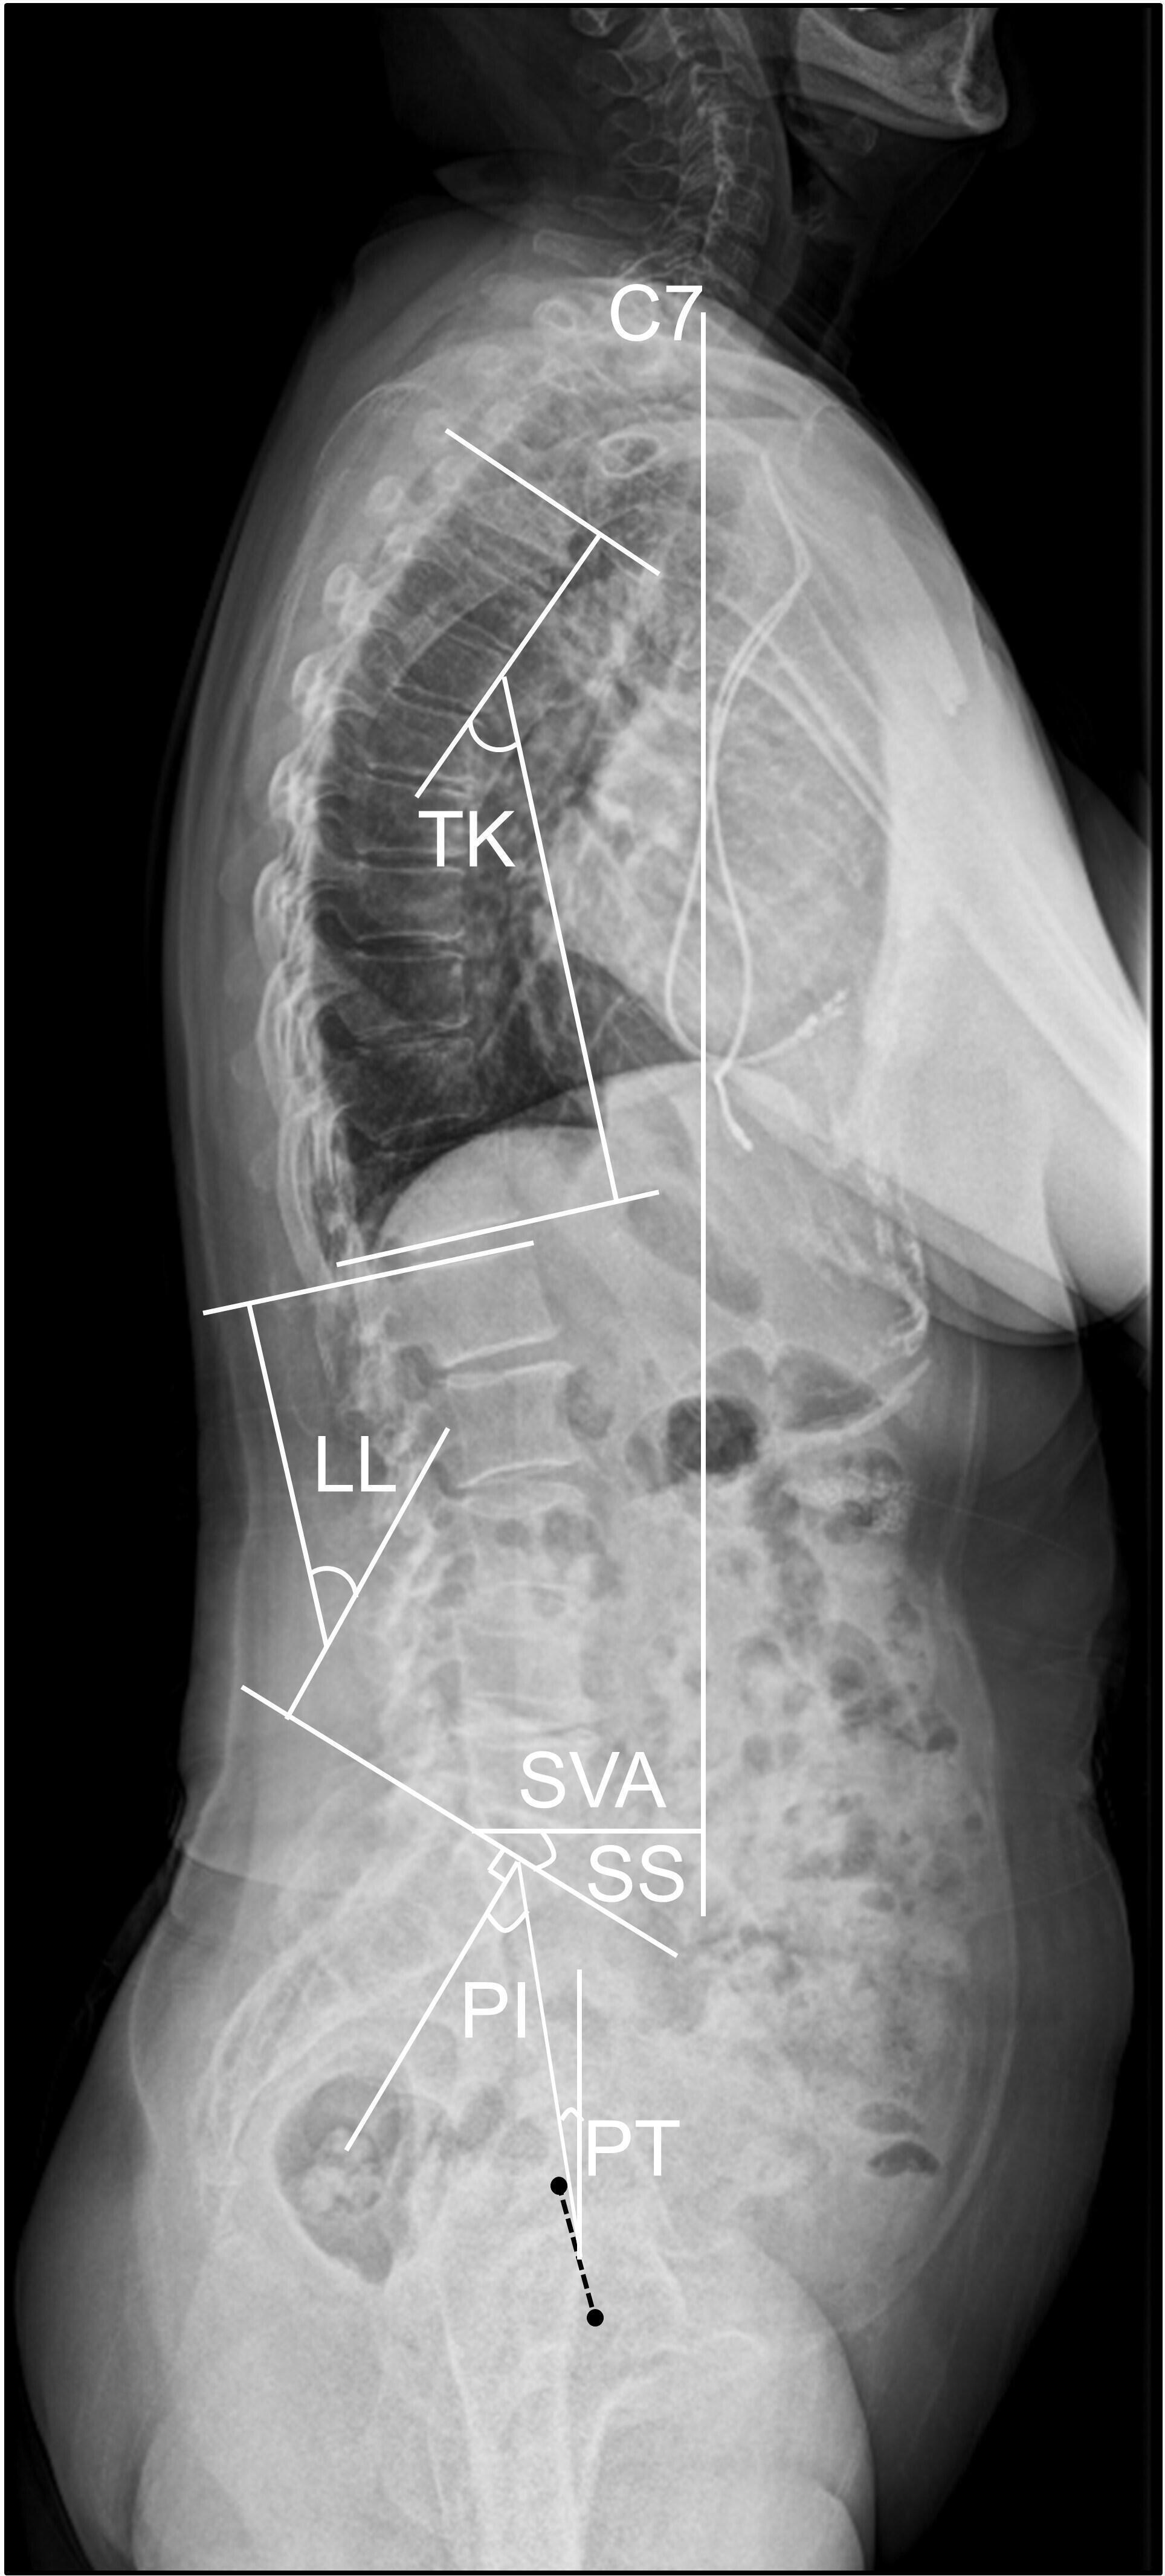 Fig. 3 
            Illustration of the radiological parameters of the sagittal alignment of the spine and pelvis. PI, pelvic incidence; PT, pelvic tilt; SS, sacral slope; LL, lumbar lordosis angle; TK, thoracic kyphosis angle; SVA, sagittal vertical axis.
          